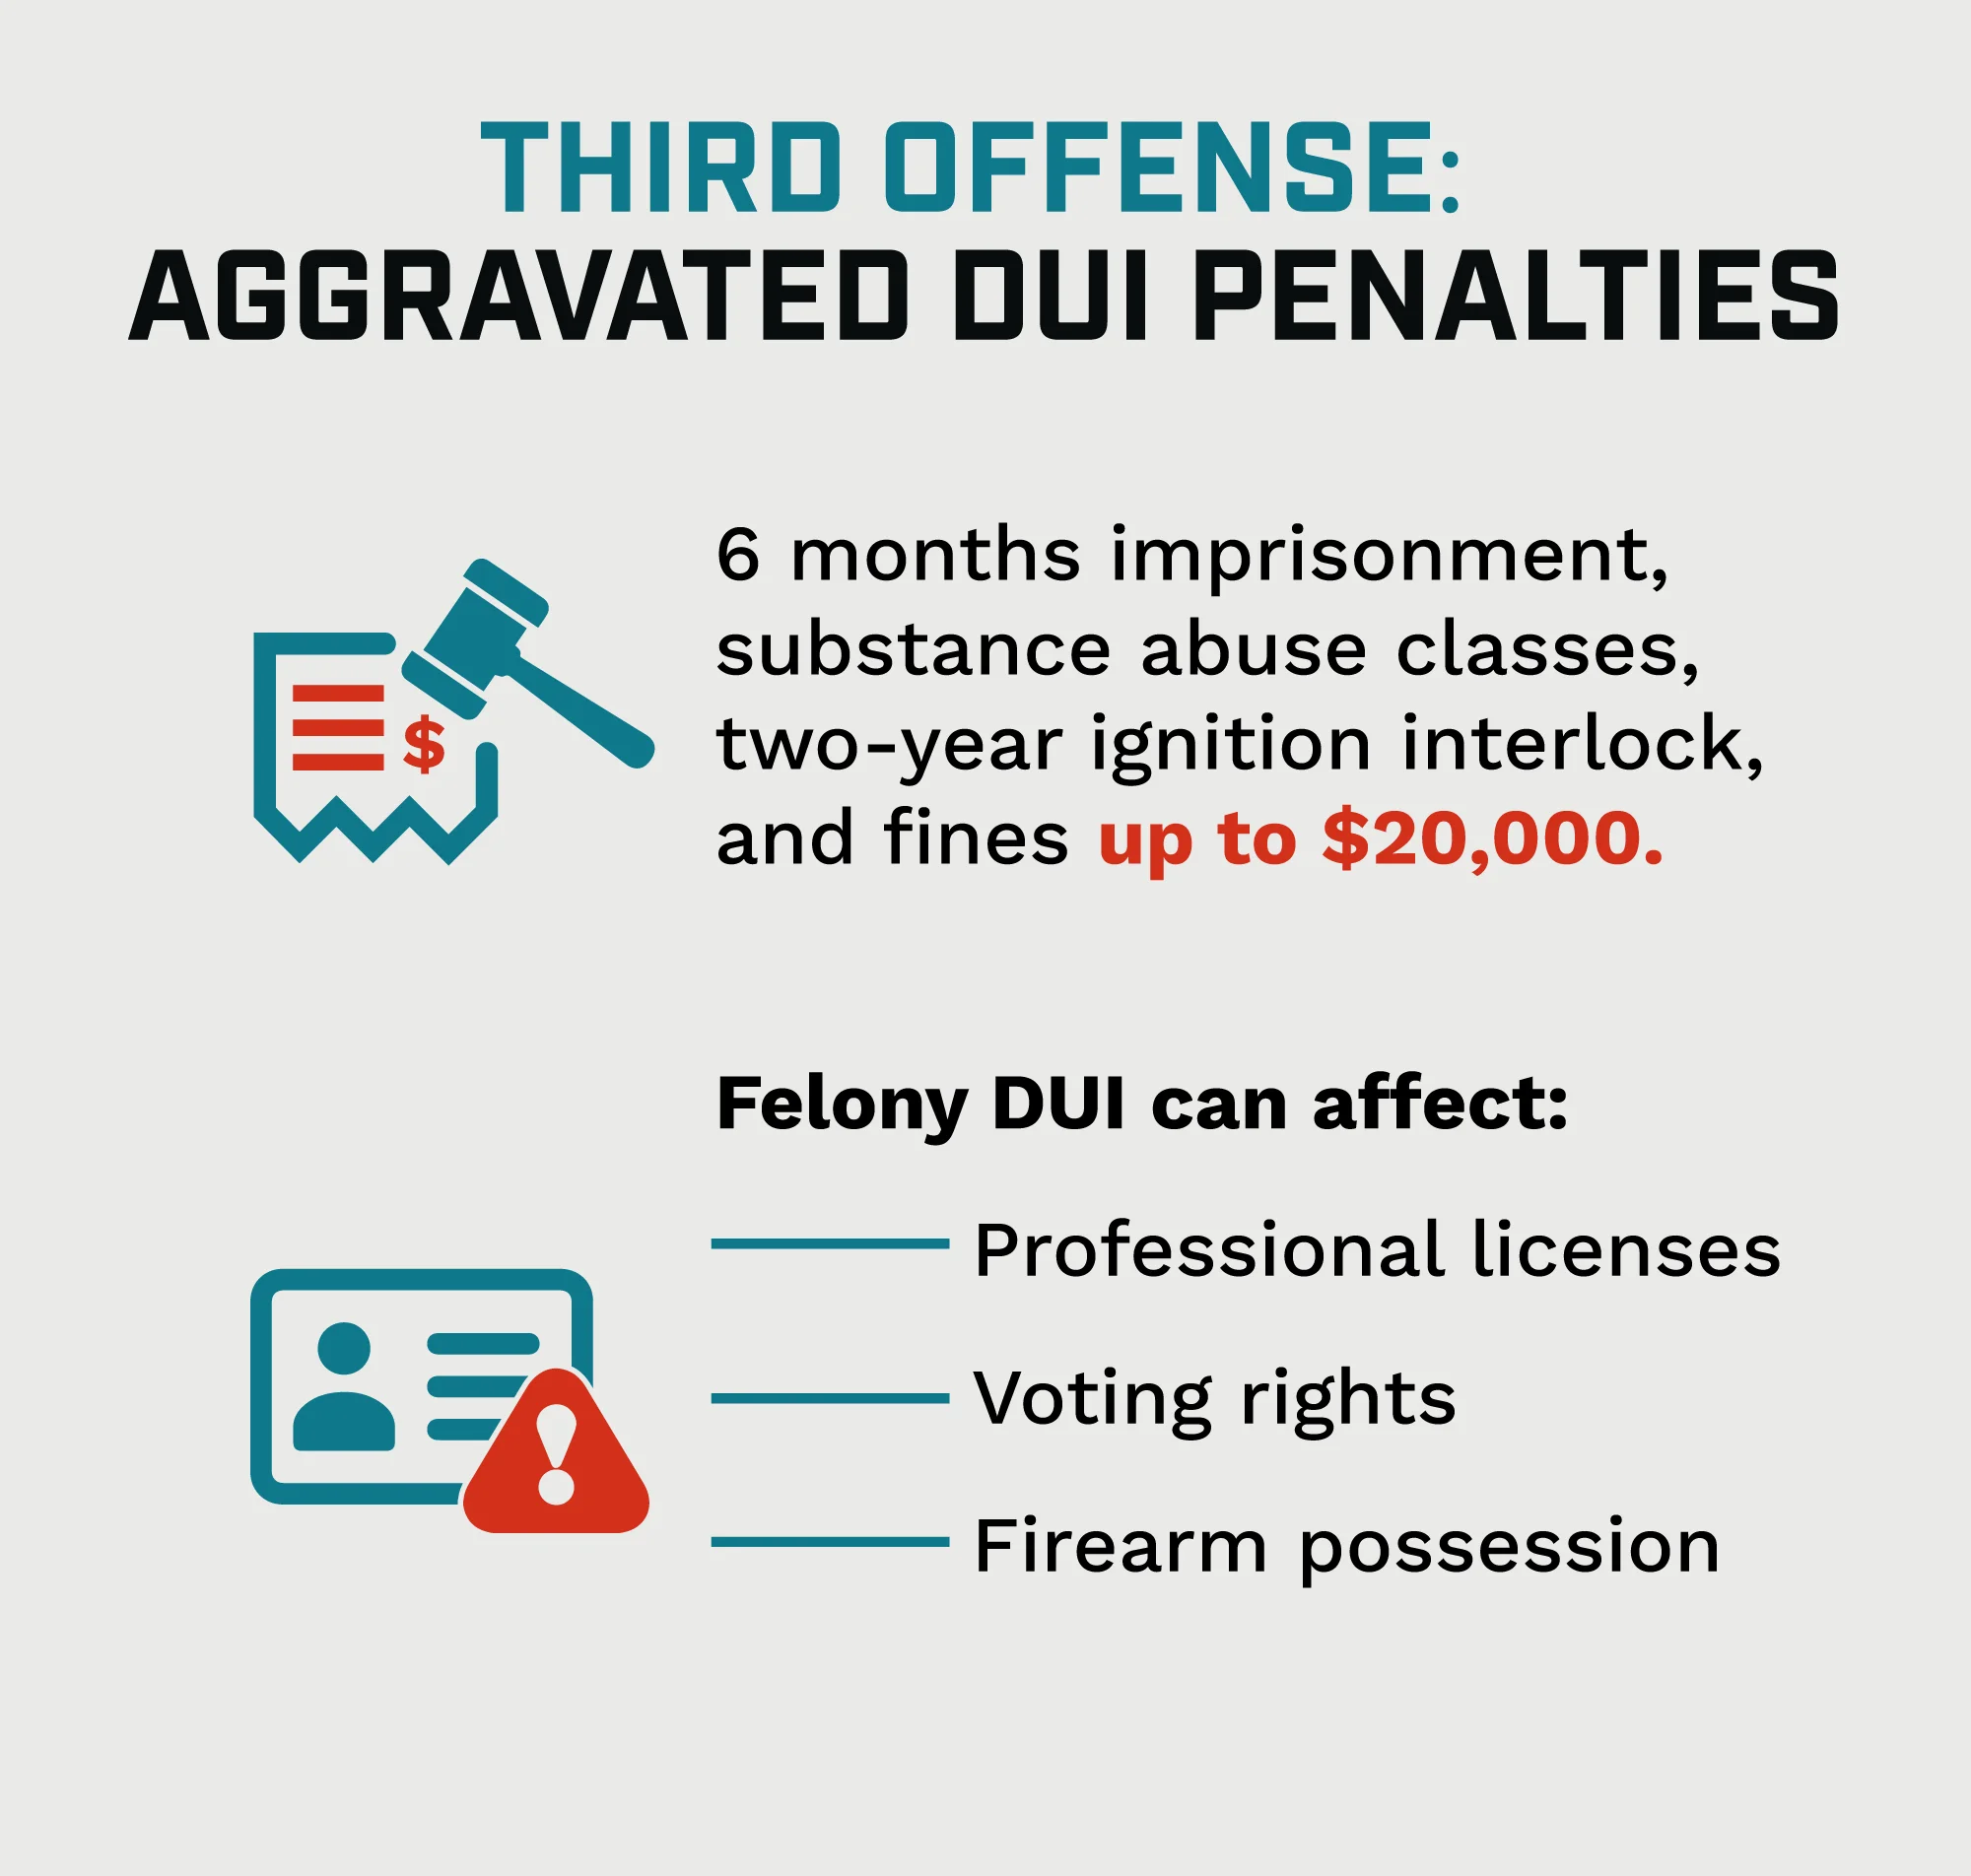 third offense: aggravated dui penalties